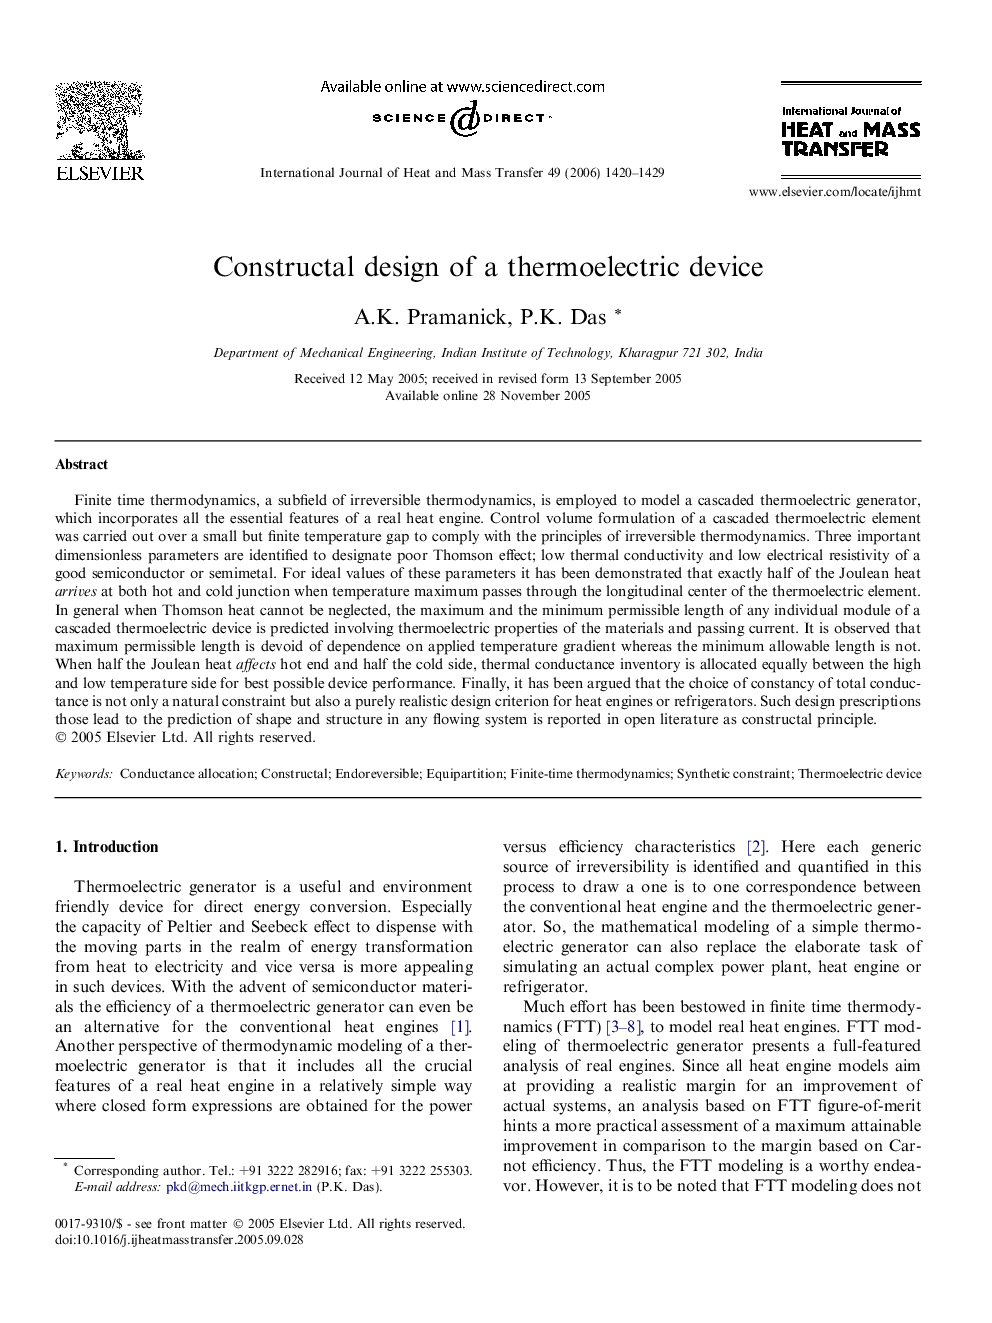 Constructal design of a thermoelectric device